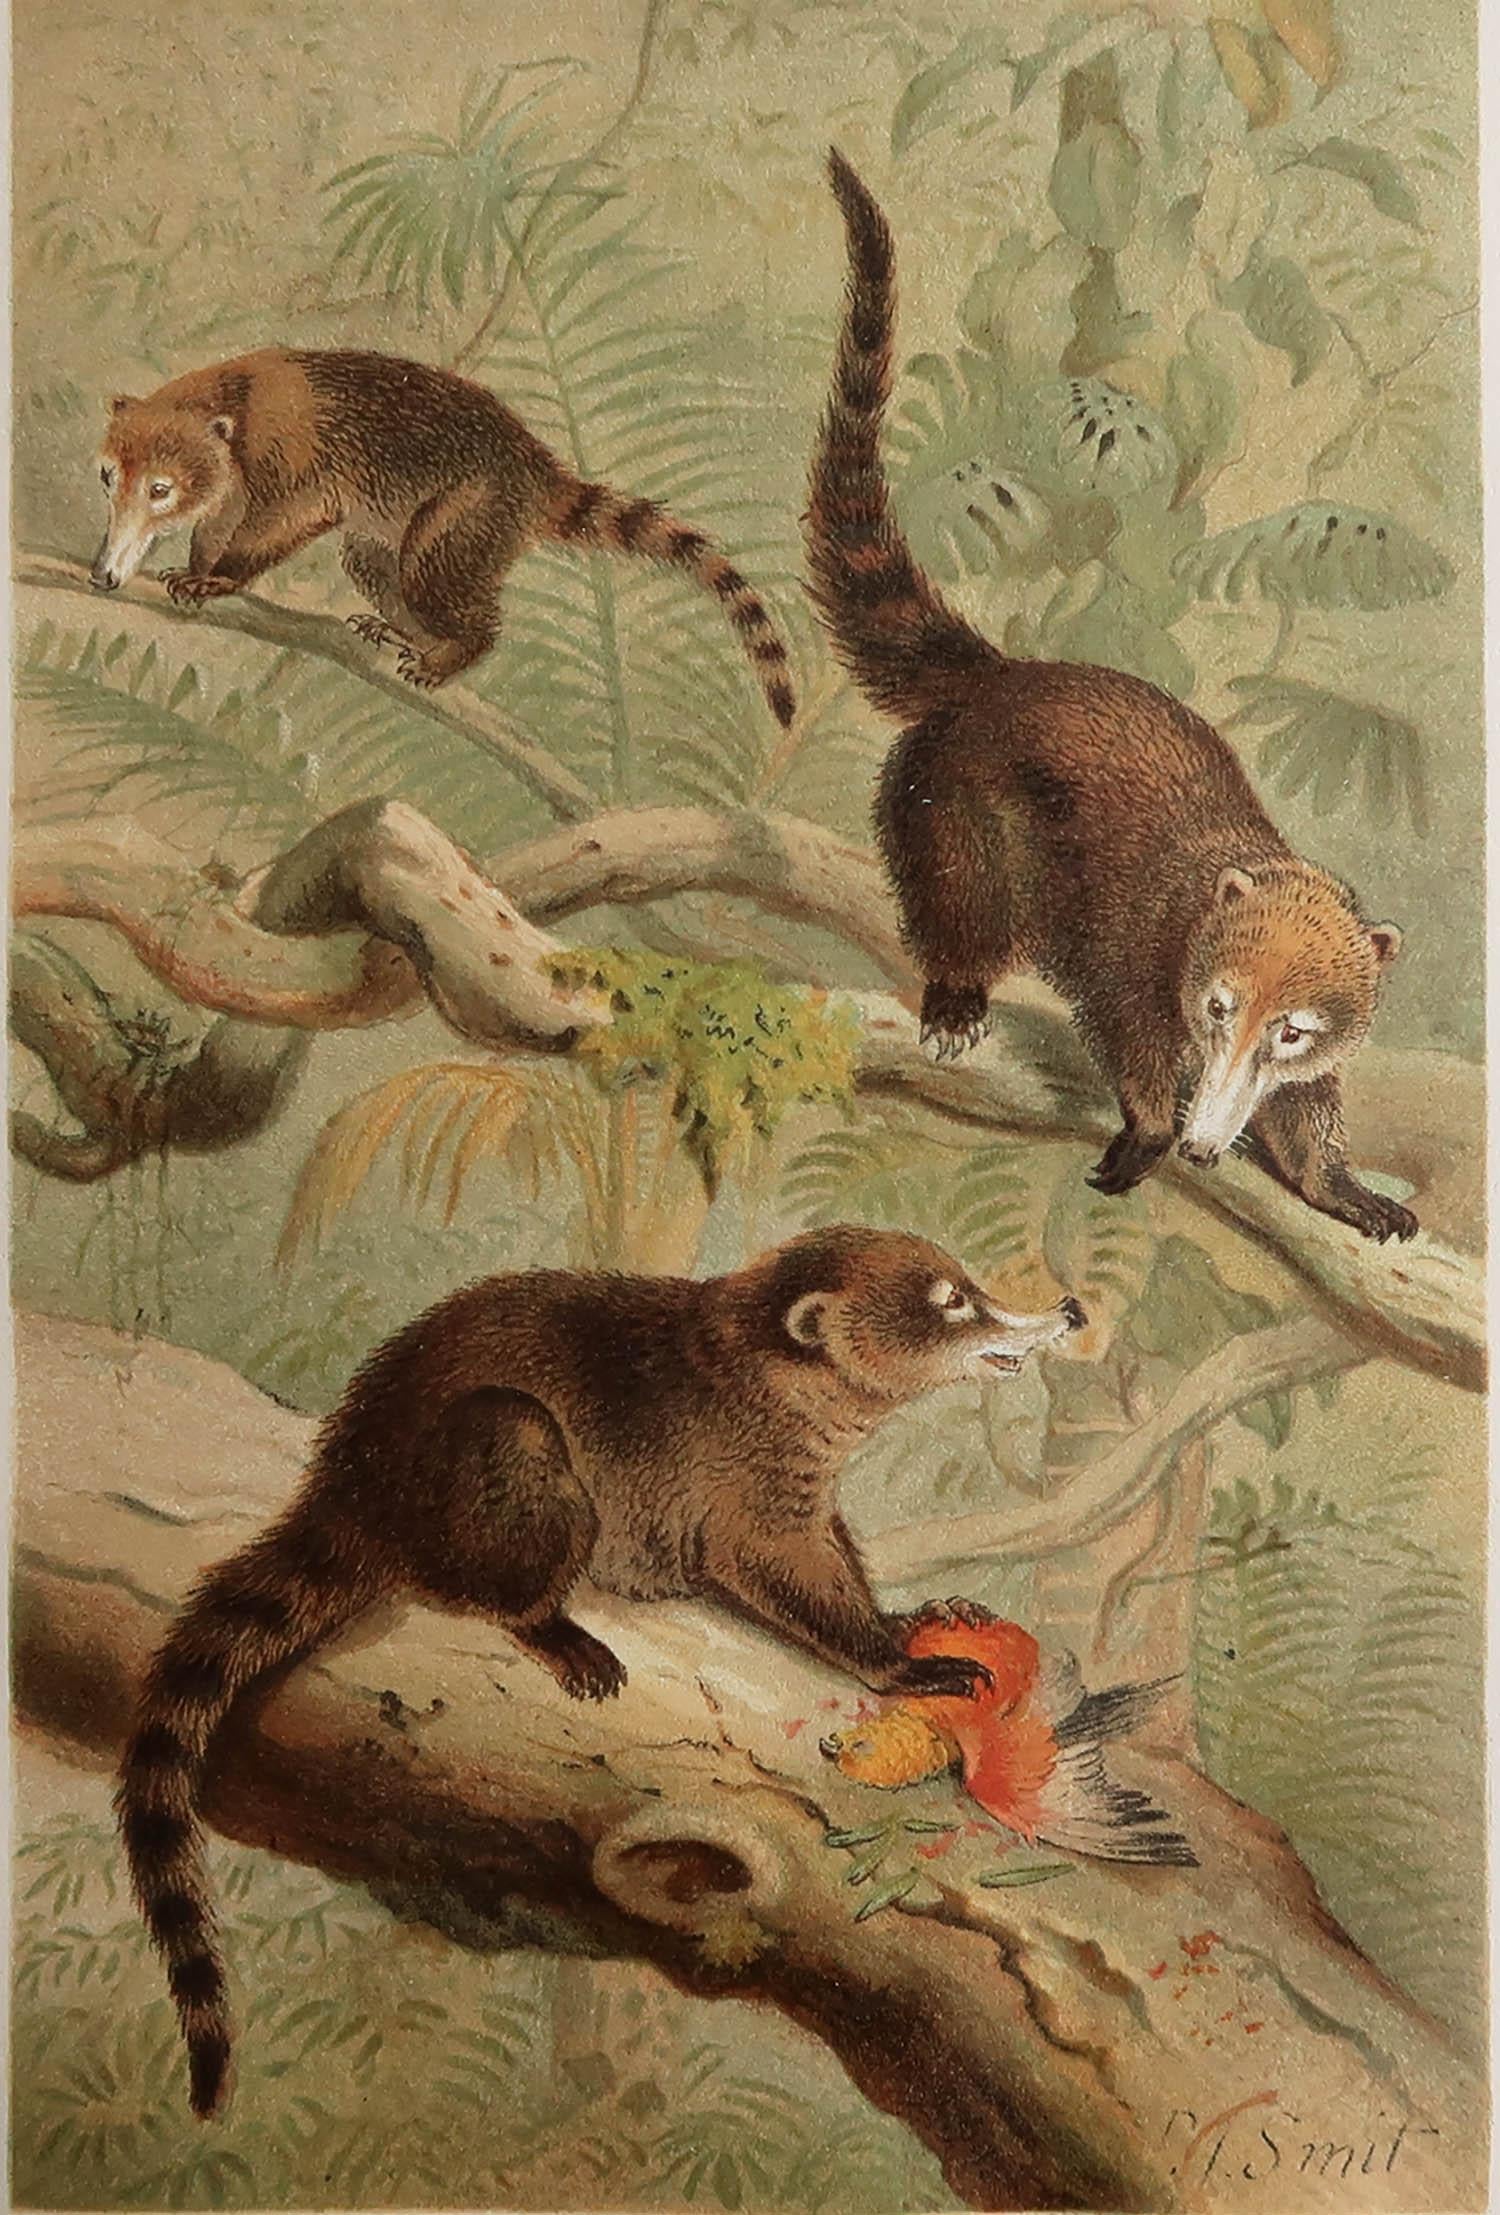 Great image of coatis

Unframed. It gives you the option of perhaps making a set up using your own choice of frames.

Chromolithograph after the original artwork by P.J Smit

Published by F.Warne, C.1890

Free shipping.






